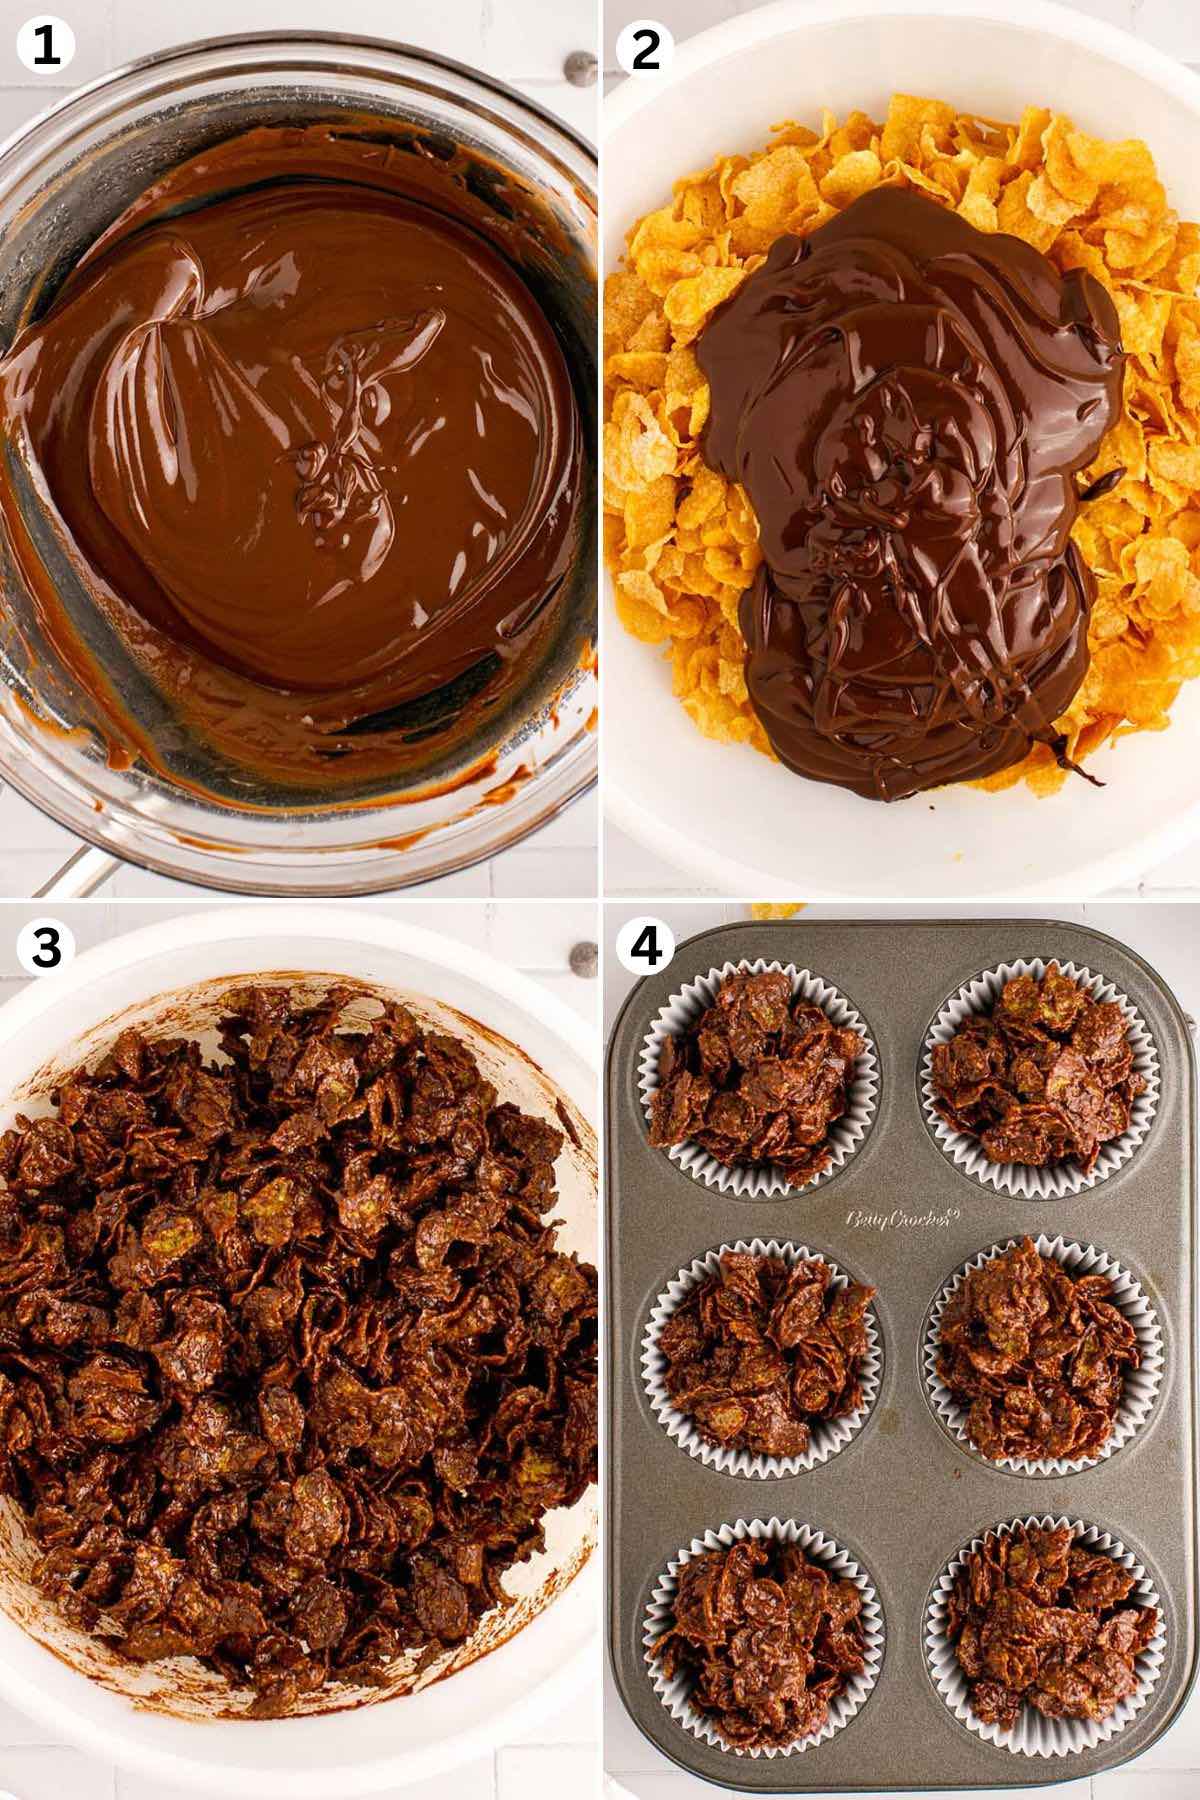 melt the chocolate. mix in the cornflakes. pour into muffin tin.